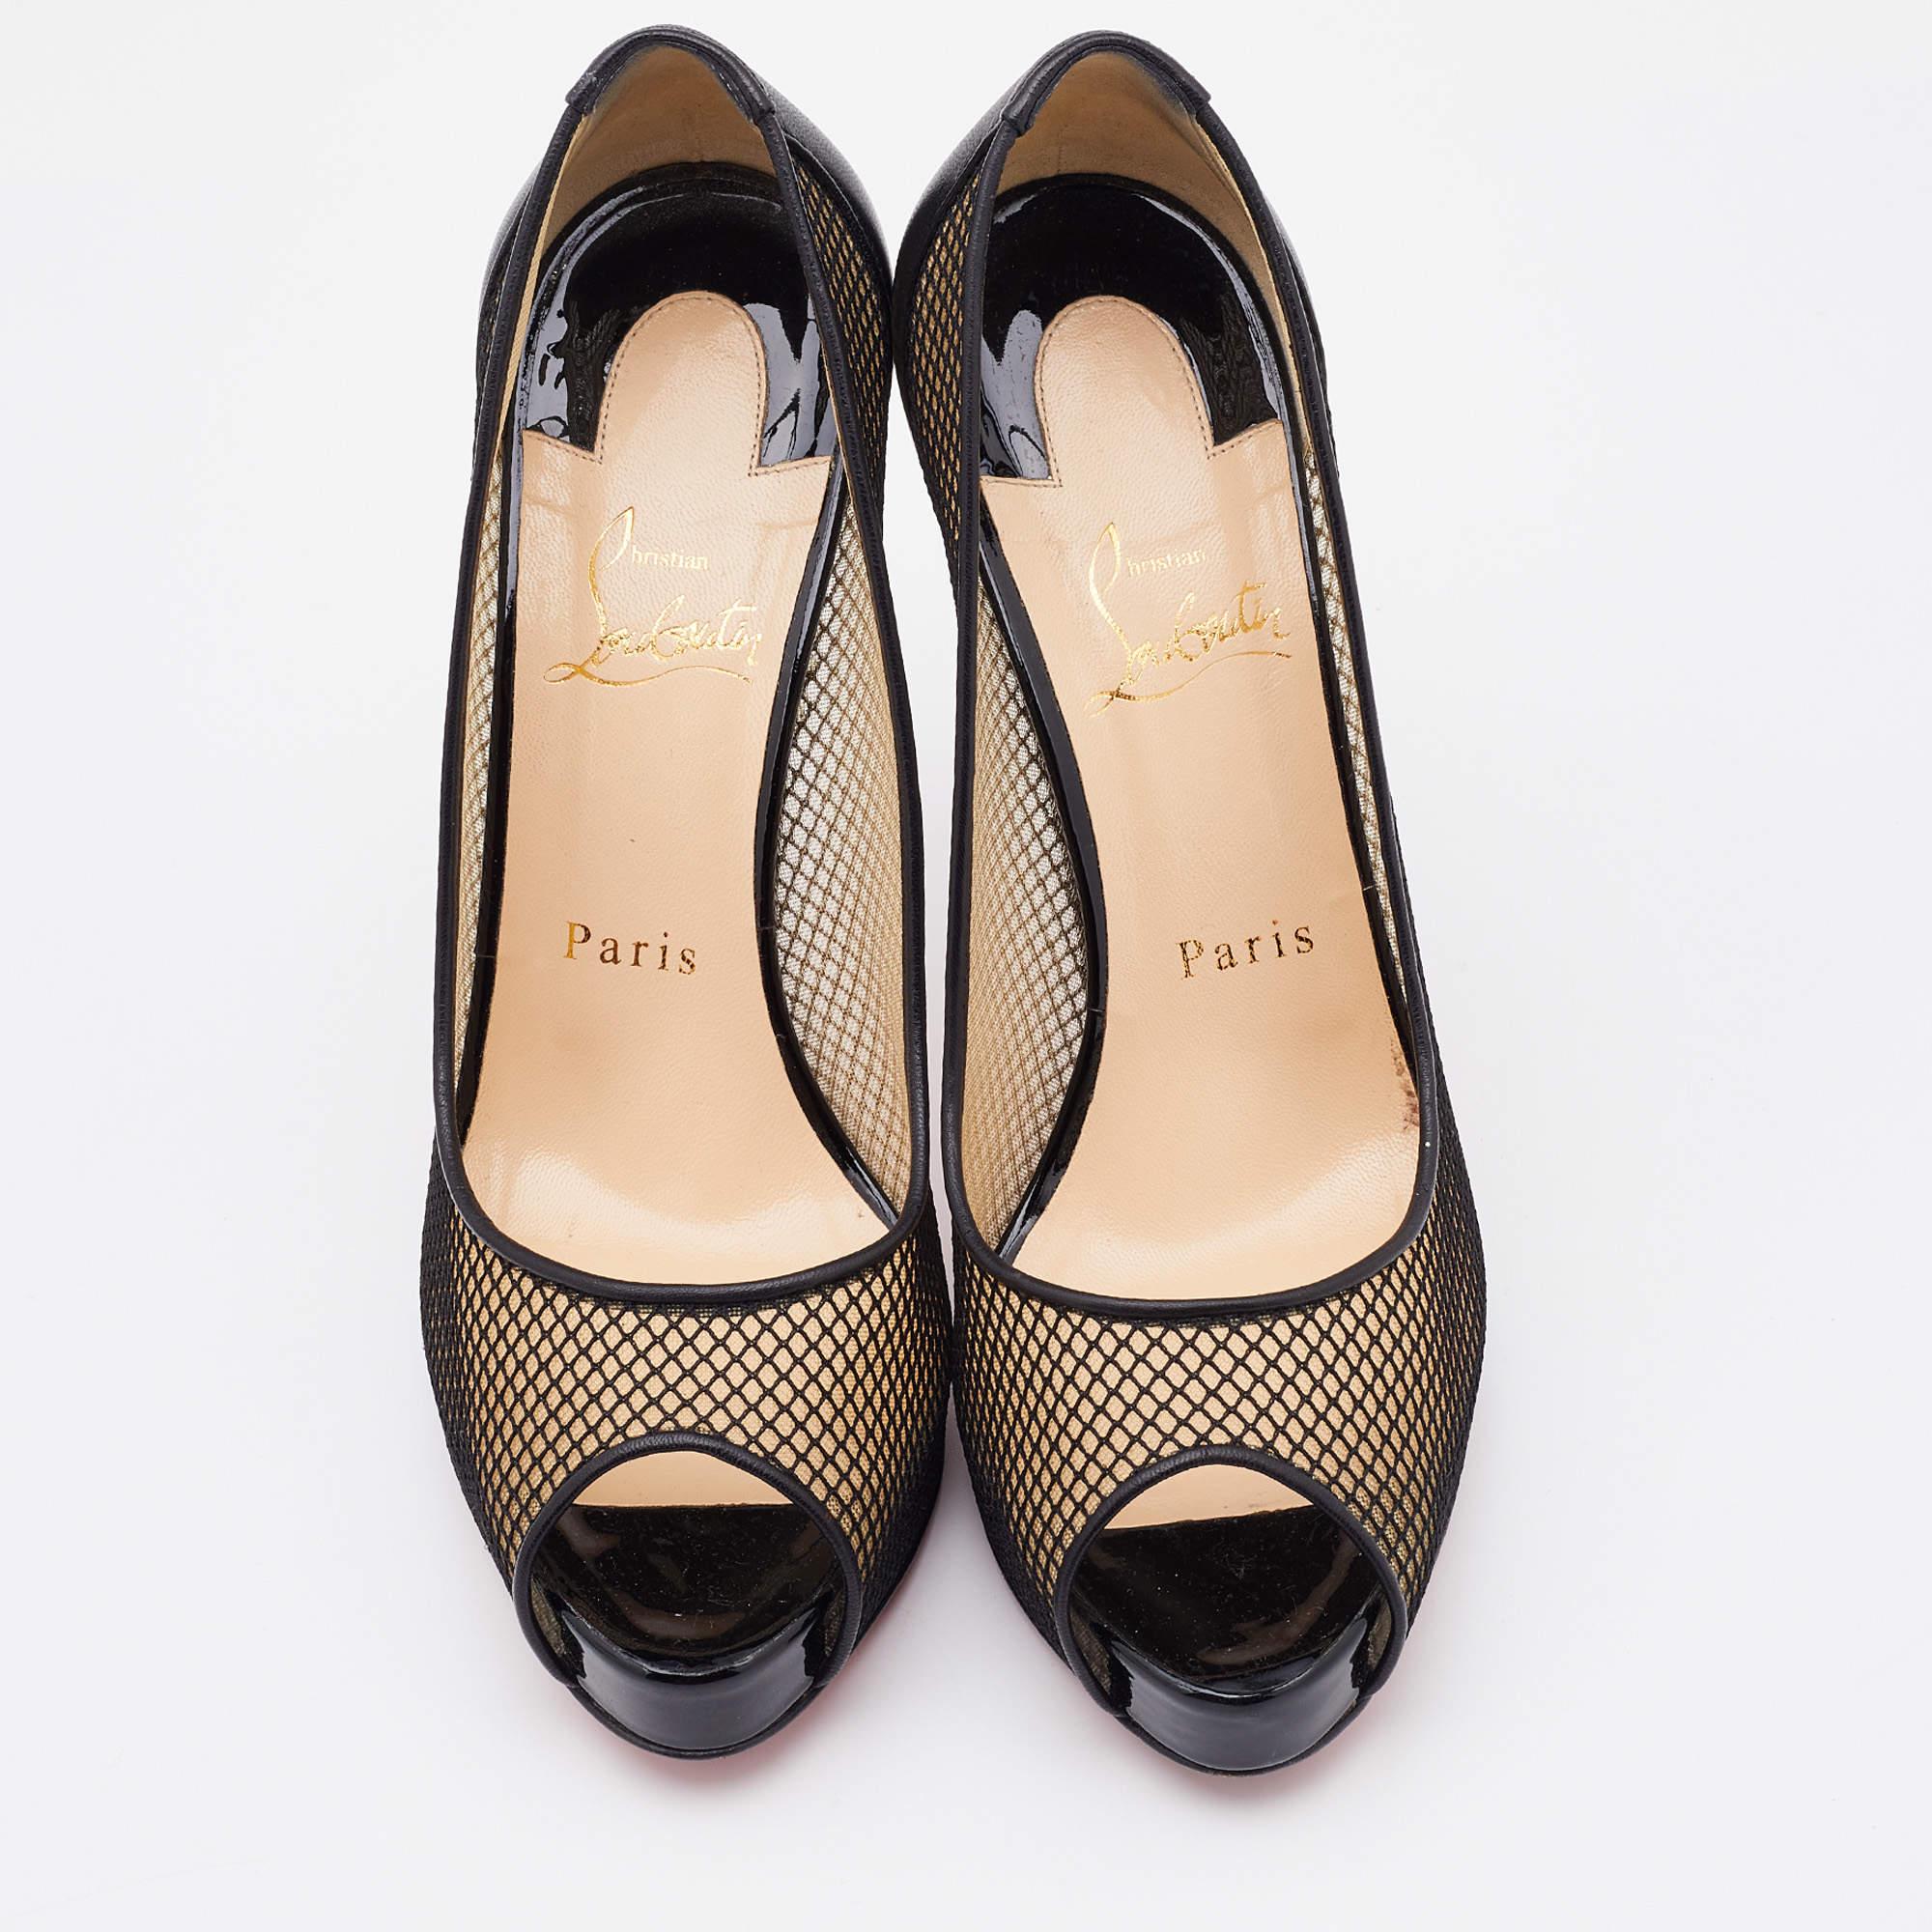 These timeless designer pumps are meant to last you season after season. They have a comfortable fit and high-quality finish.

Includes: Original Dustbag, Original Box, Extra Heel Tips